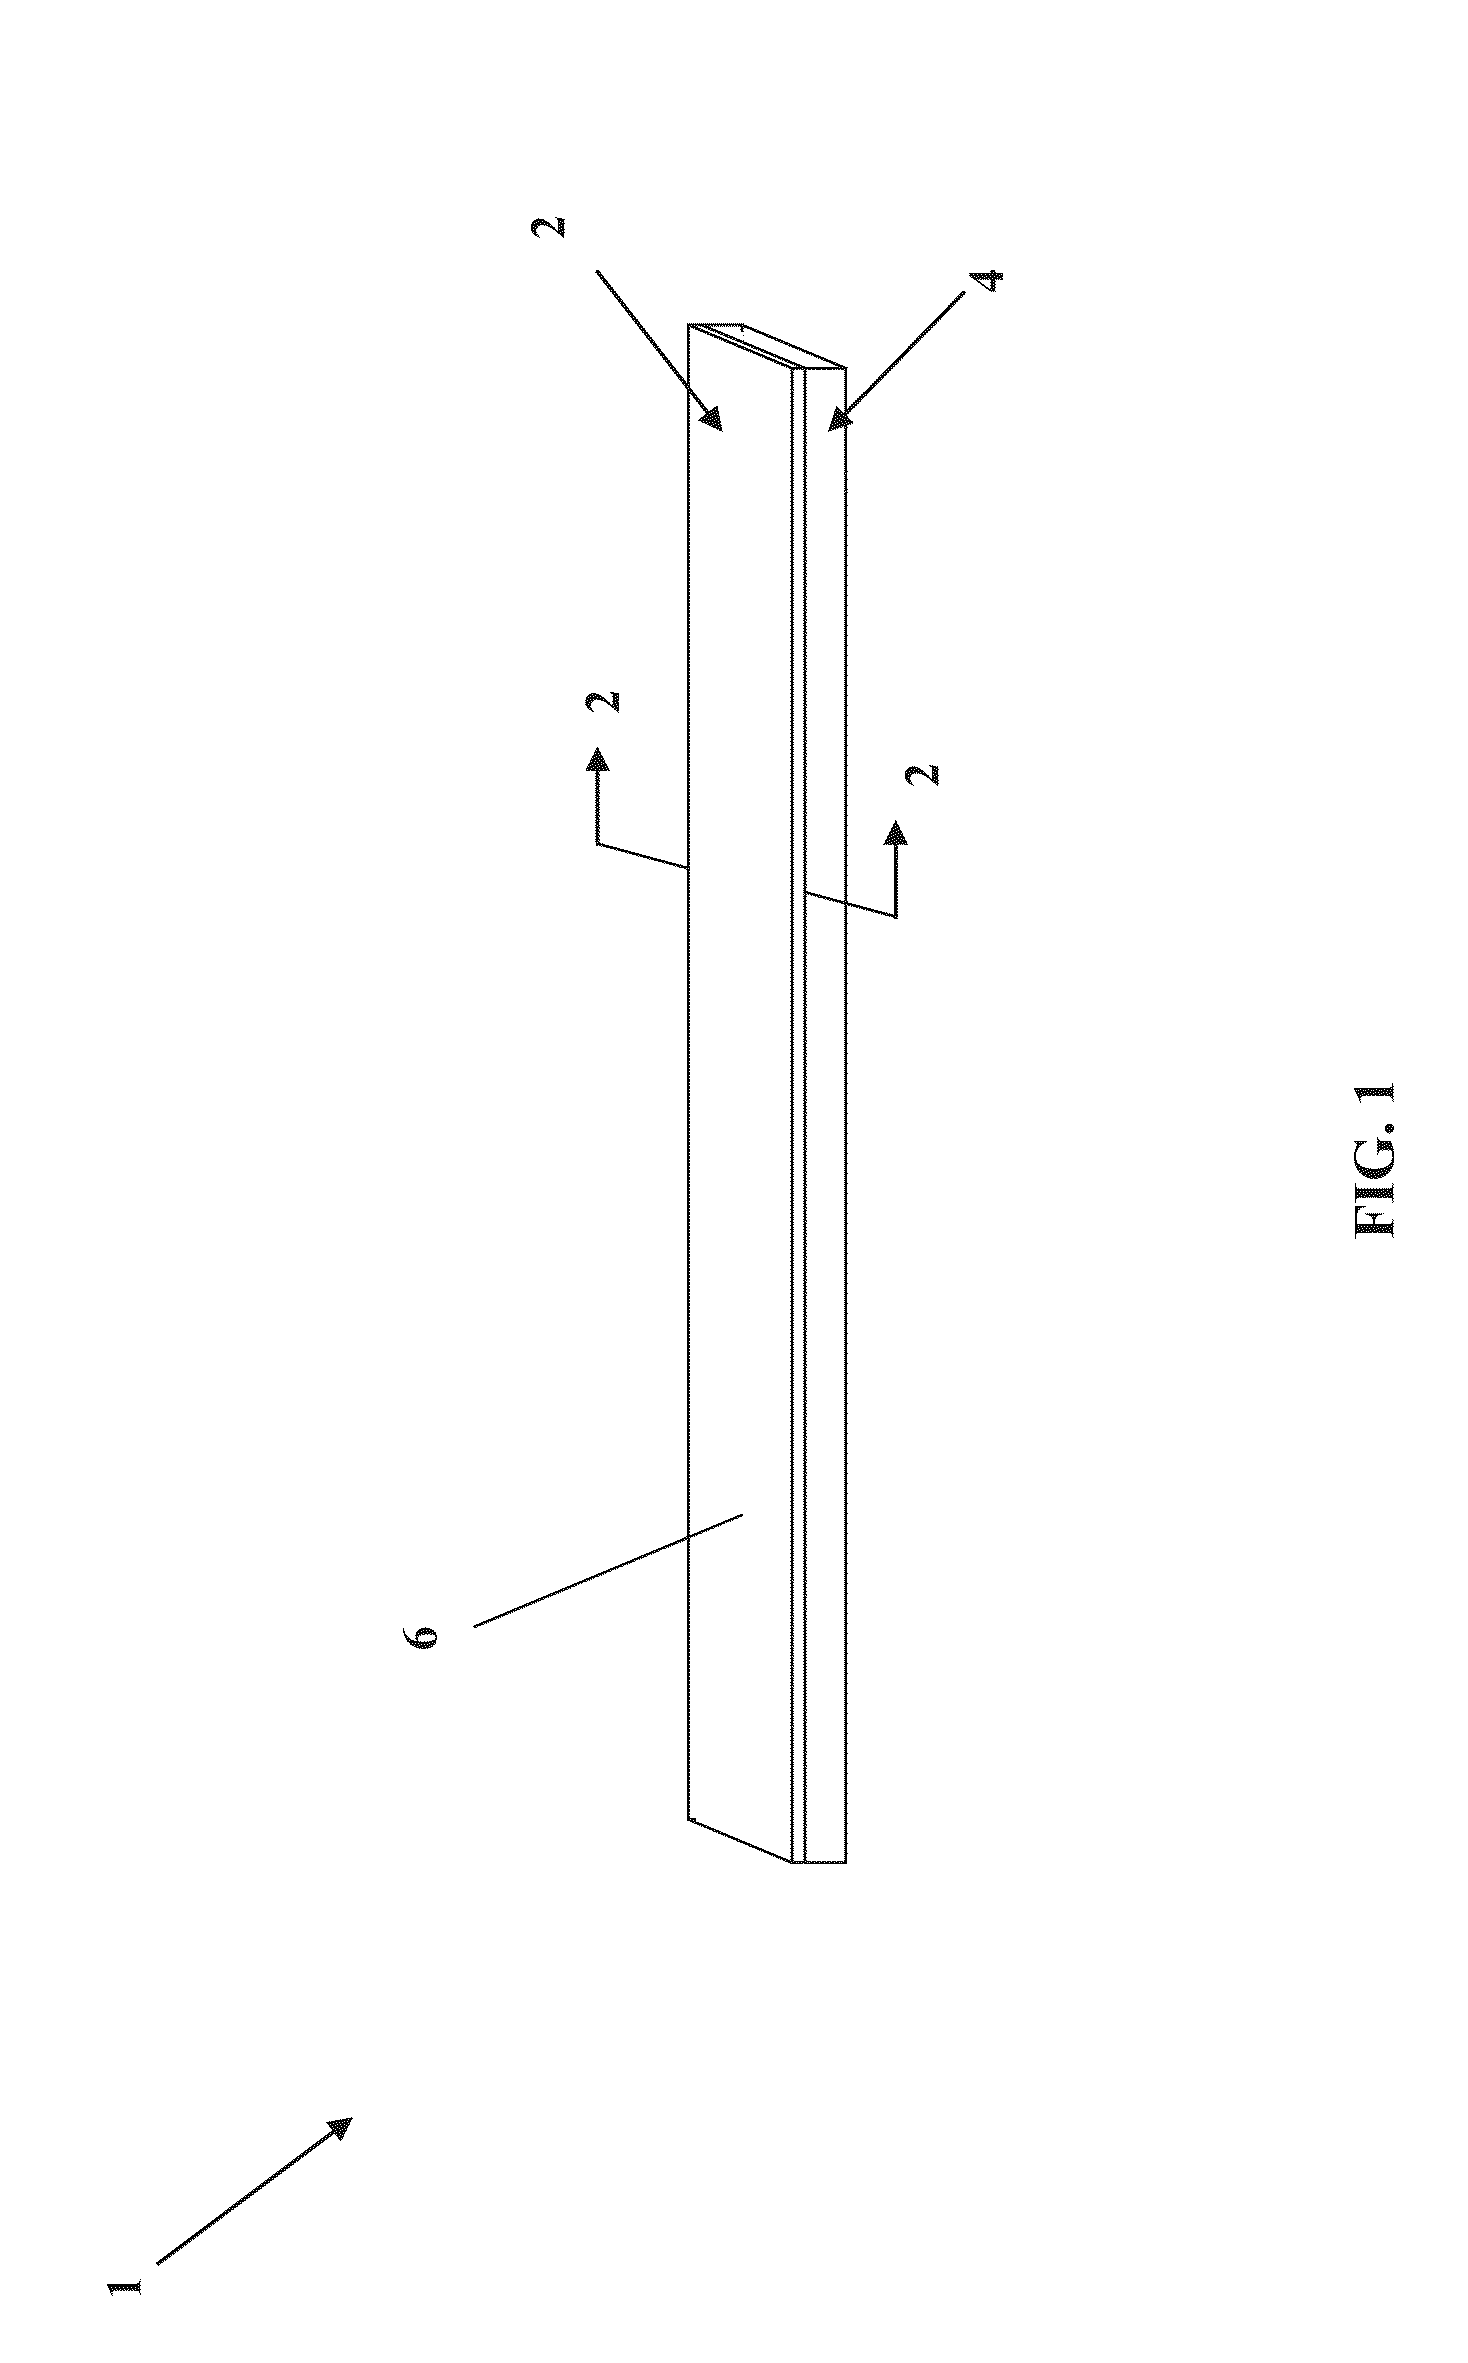 Acoustical vinyl flooring and methods of manufacture